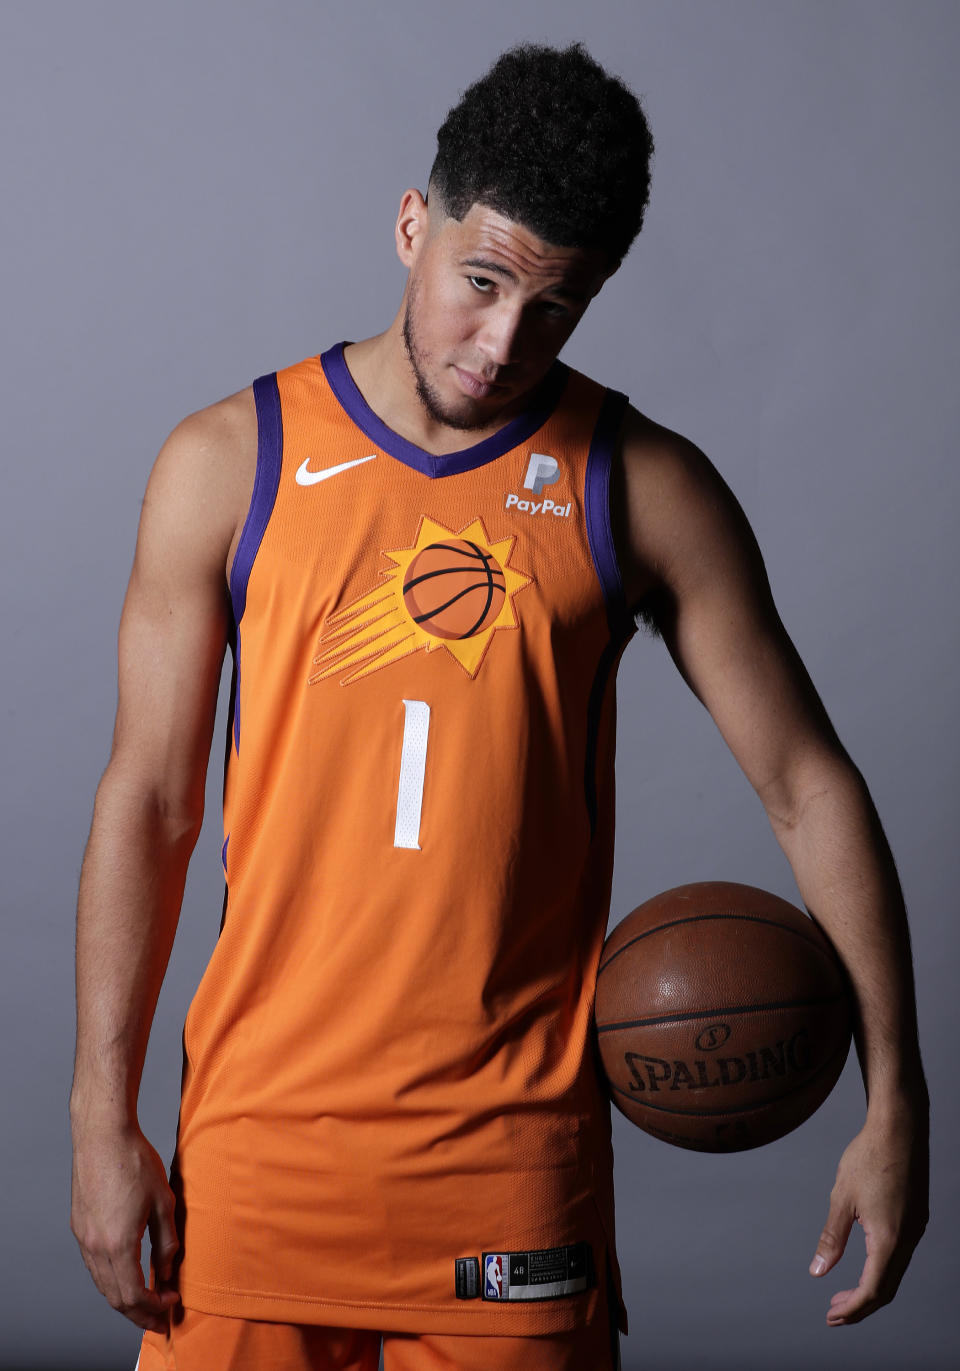 "Smile if you like being on the Phoenix Suns." — the photographer to Devin Booker, I presume